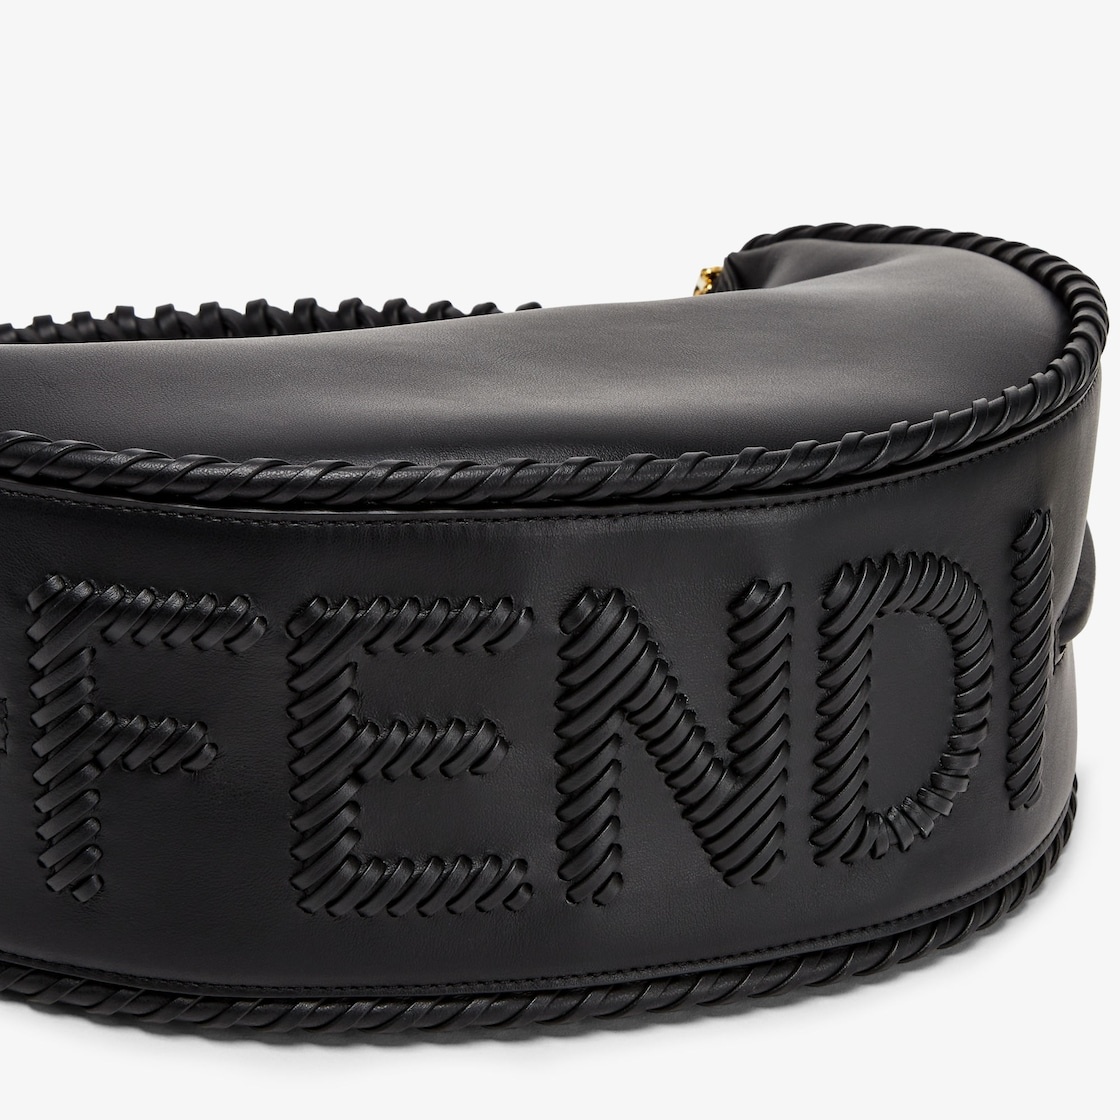 Fendigraphy Small - Black leather bag